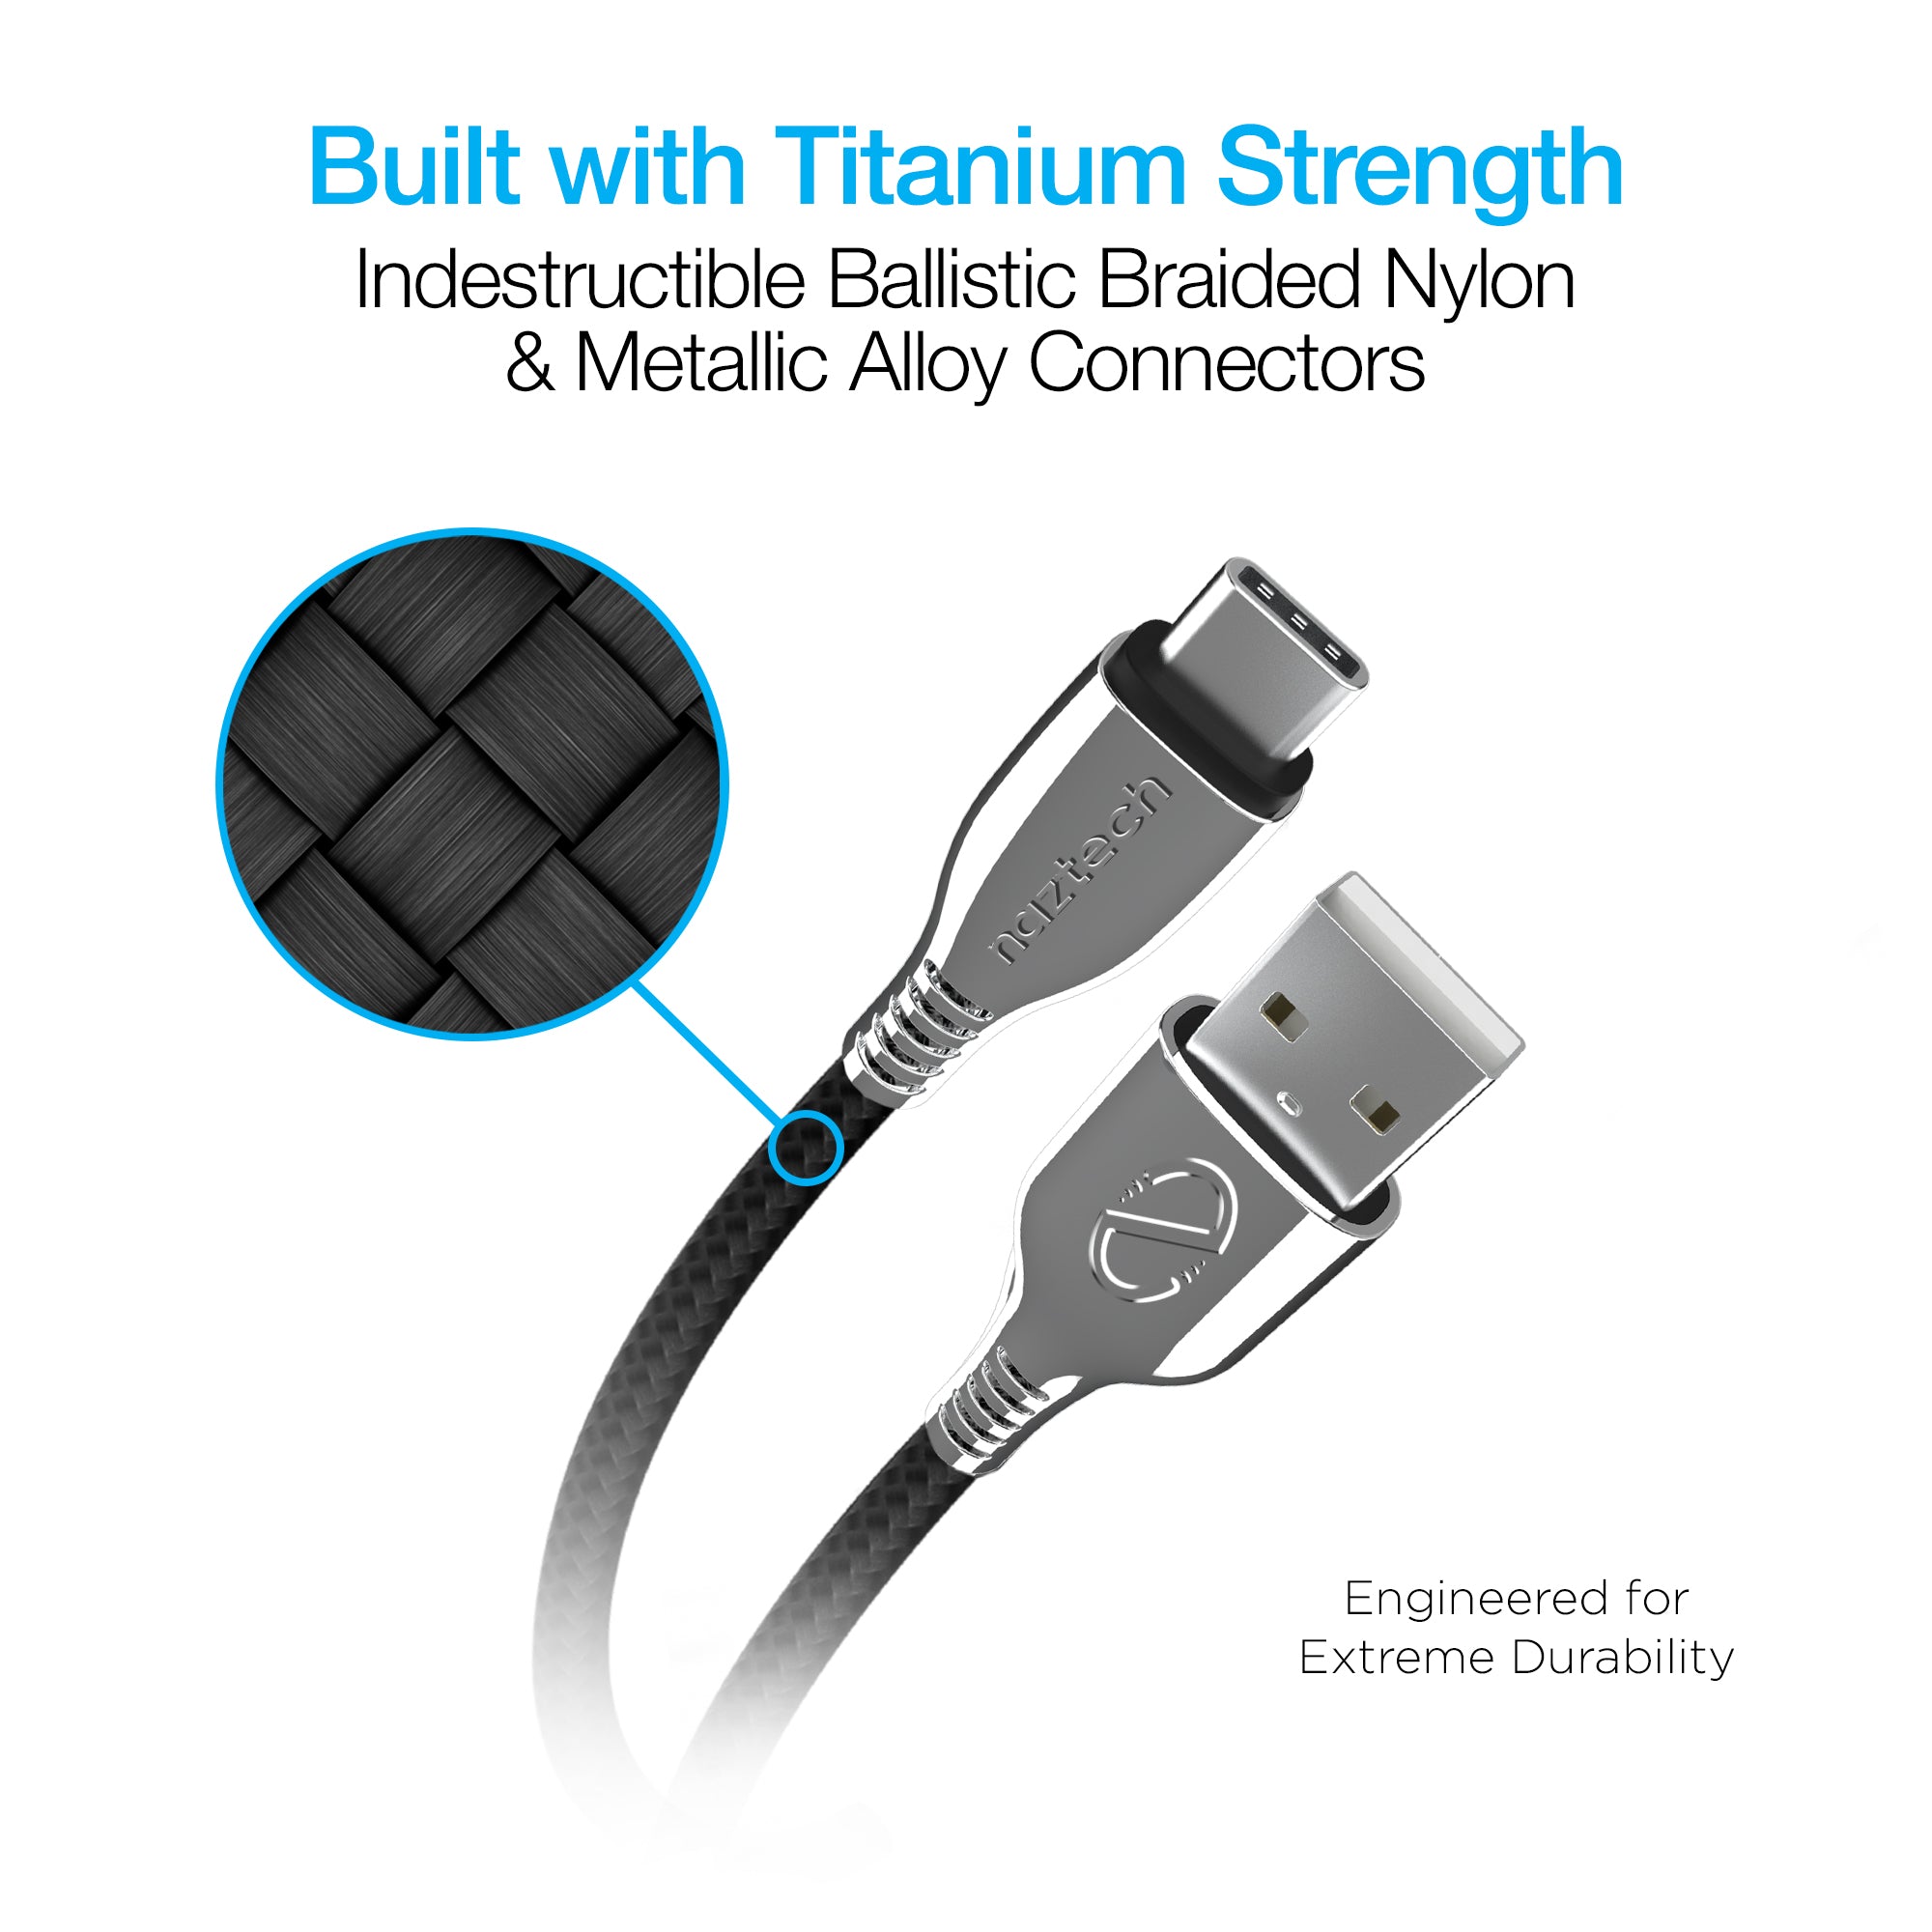 USB-C to Micro USB Adapter Cable